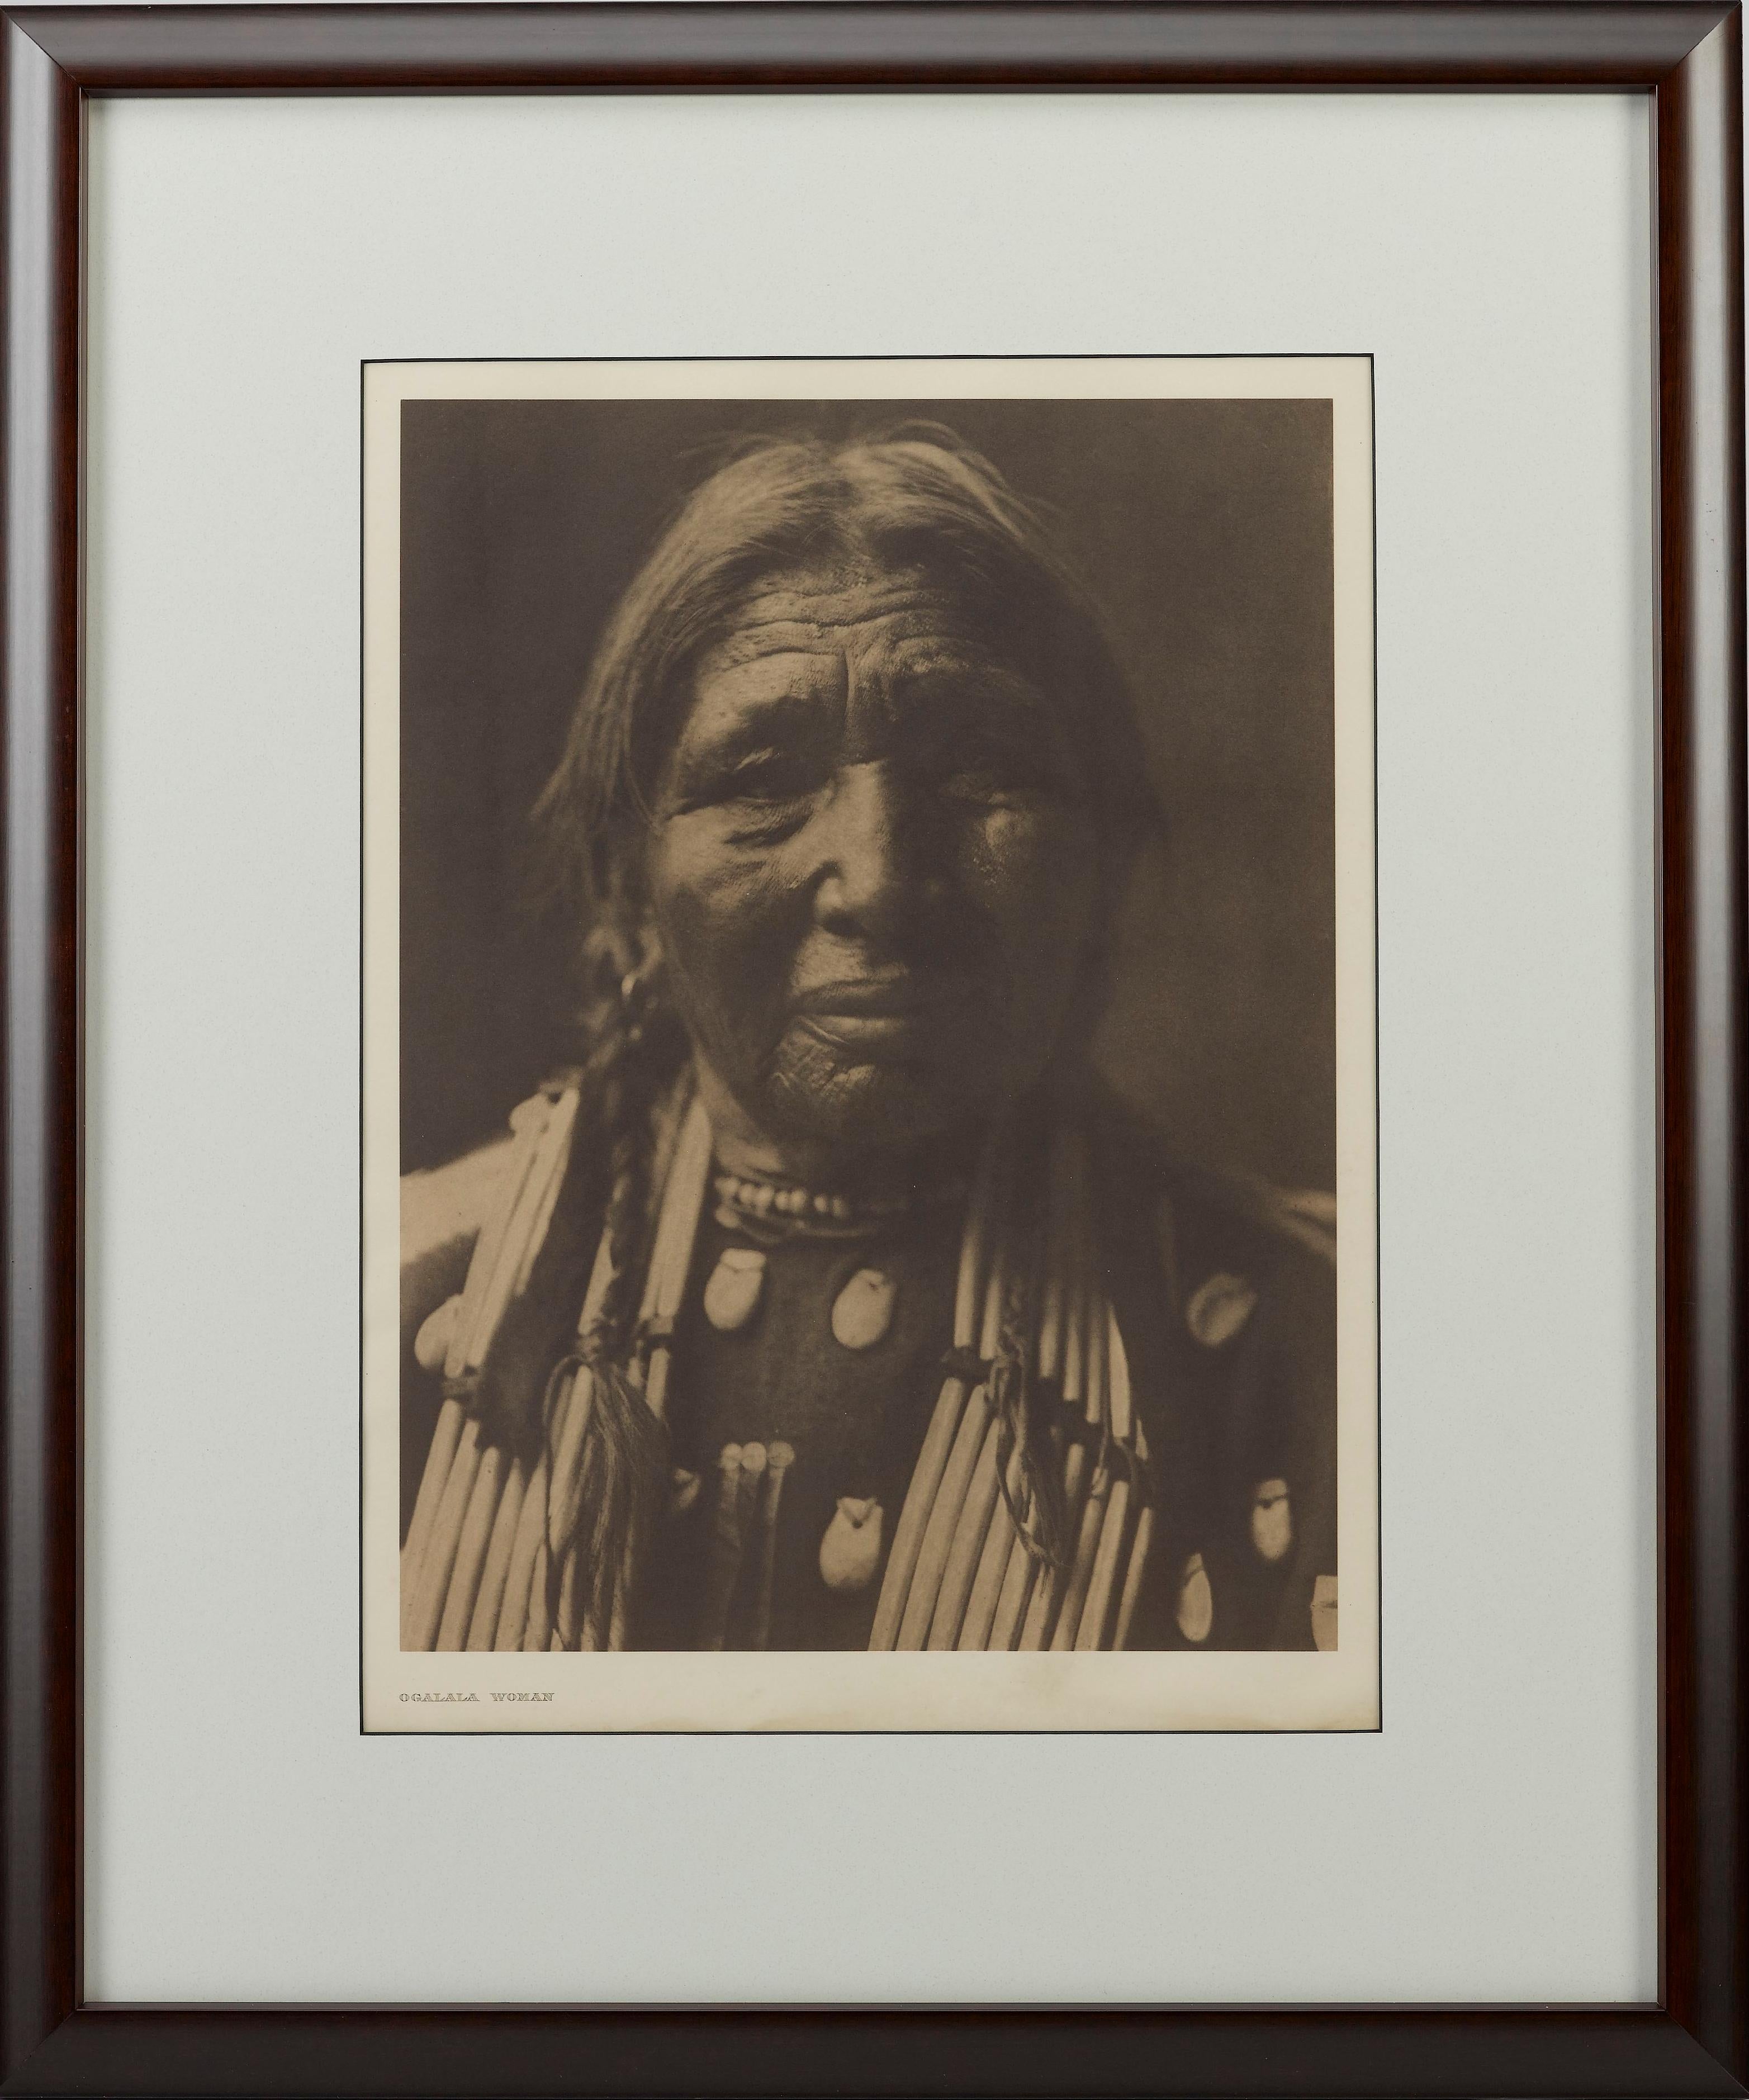 Presented is a fine photogravure portrait of an Ogalala woman by Edward Curtis. The image is Plate 94 from Supplementary Portfolio 3 of Edward Curtis' epic project The North American Indian. The caption provided by Curtis for this image is “A face